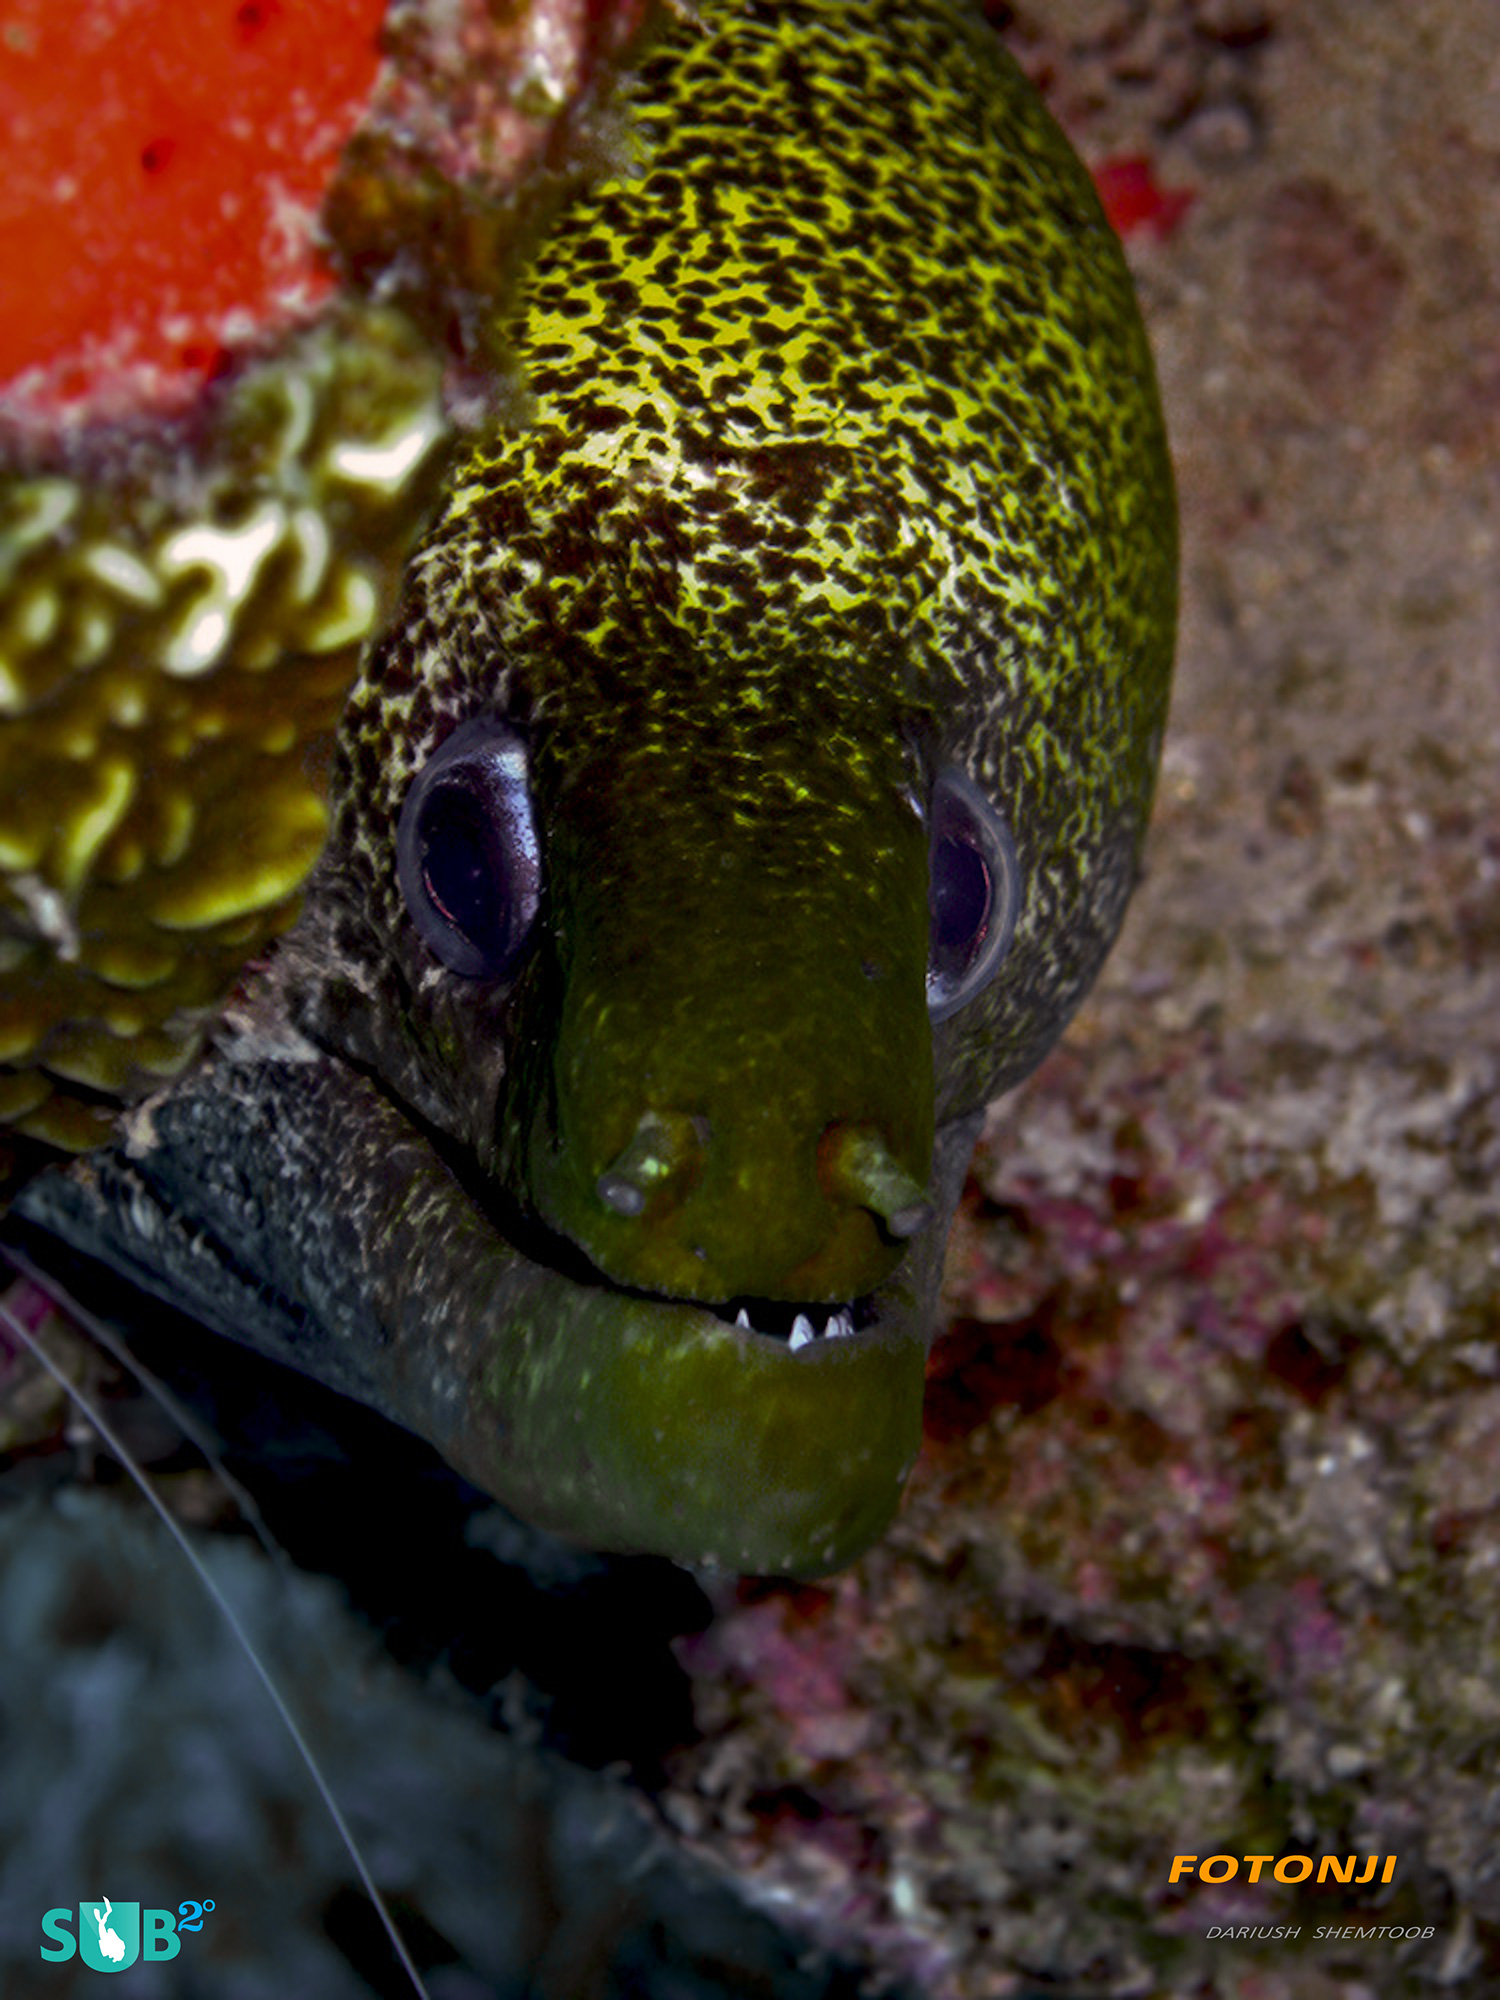 This curious moray eel seemed to constantly demand attention popping its head out and following the camera [1/60, f2.8, ISO250]